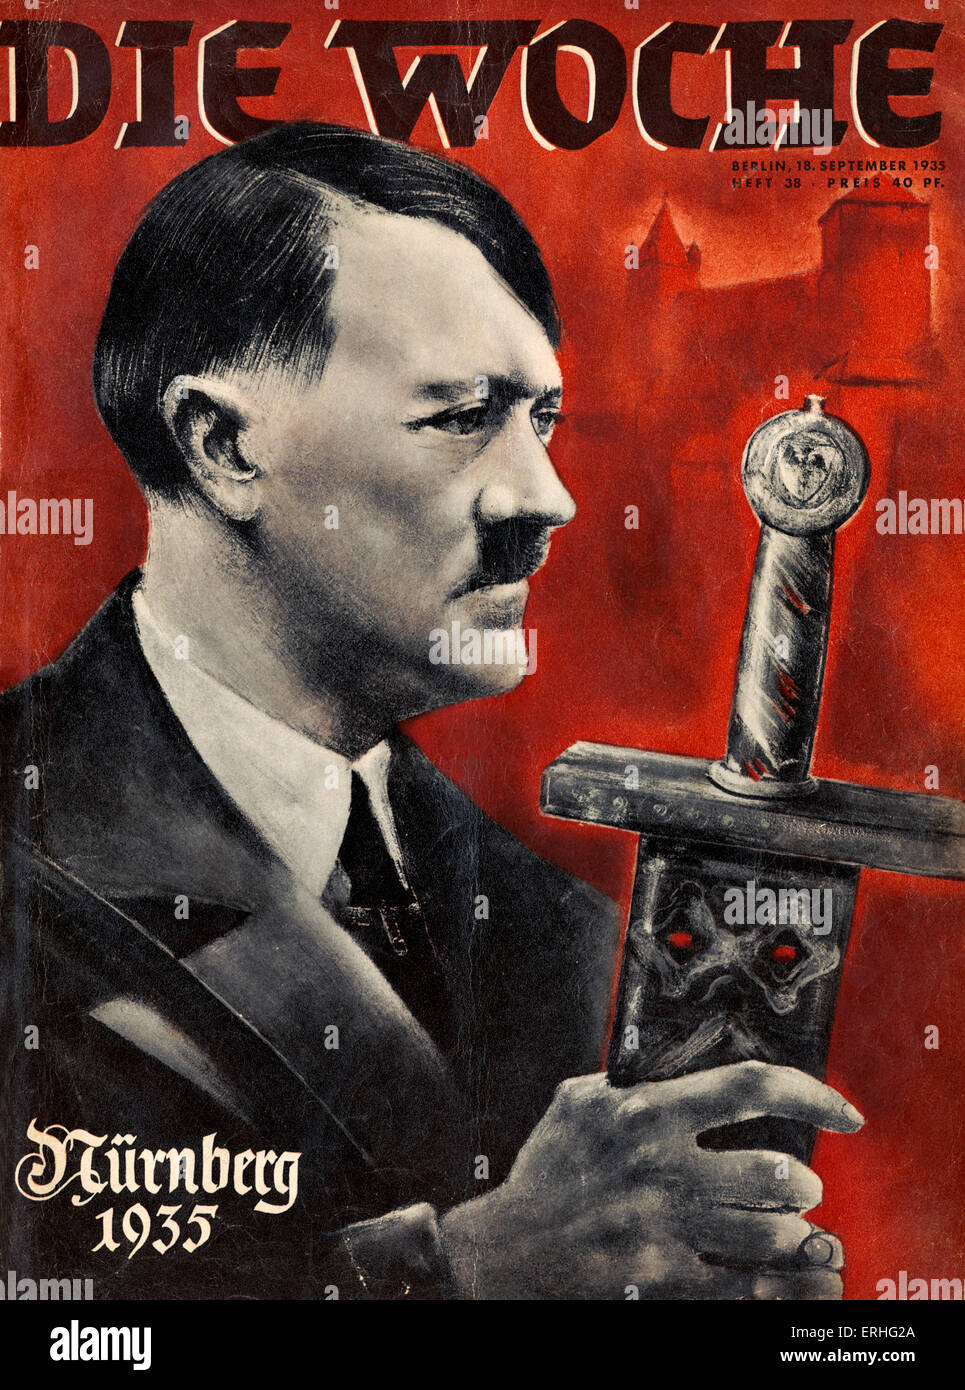 Hitler with ceremonial sword on cover of  Nuremberg rally issue of Die Woche.    Nurnberg 1935 is written on cover. Wagner link Stock Photo